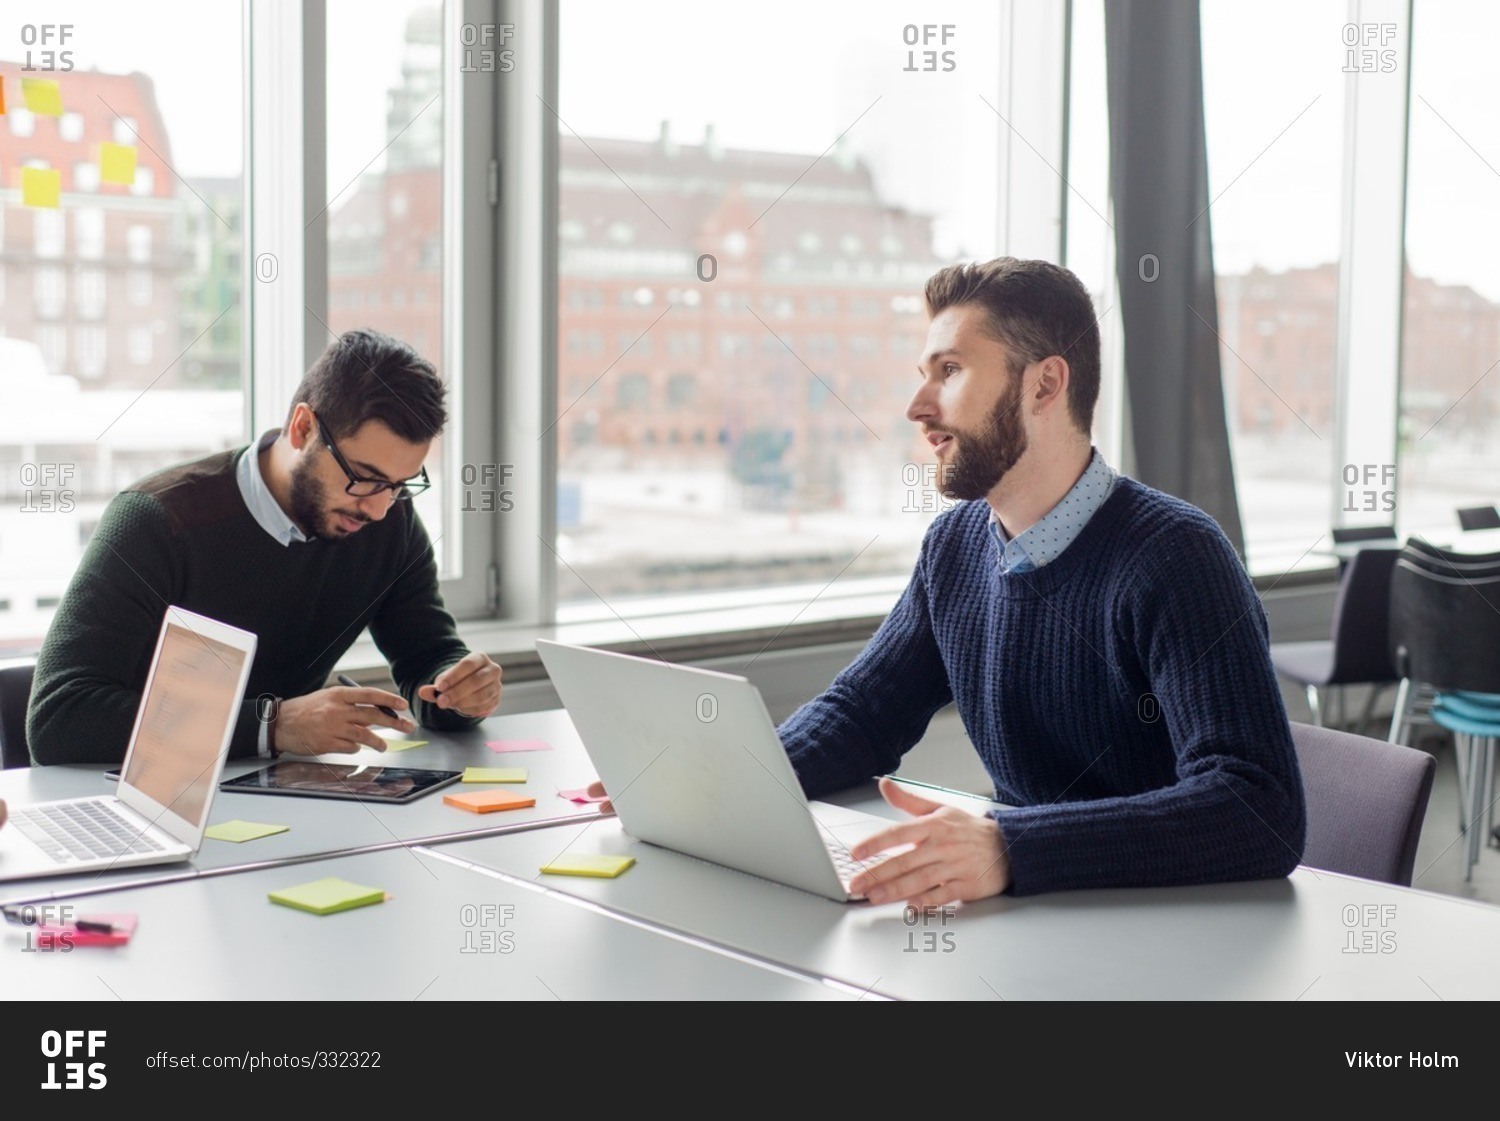 Young men collaborating together at a business meeting stock photo - OFFSET